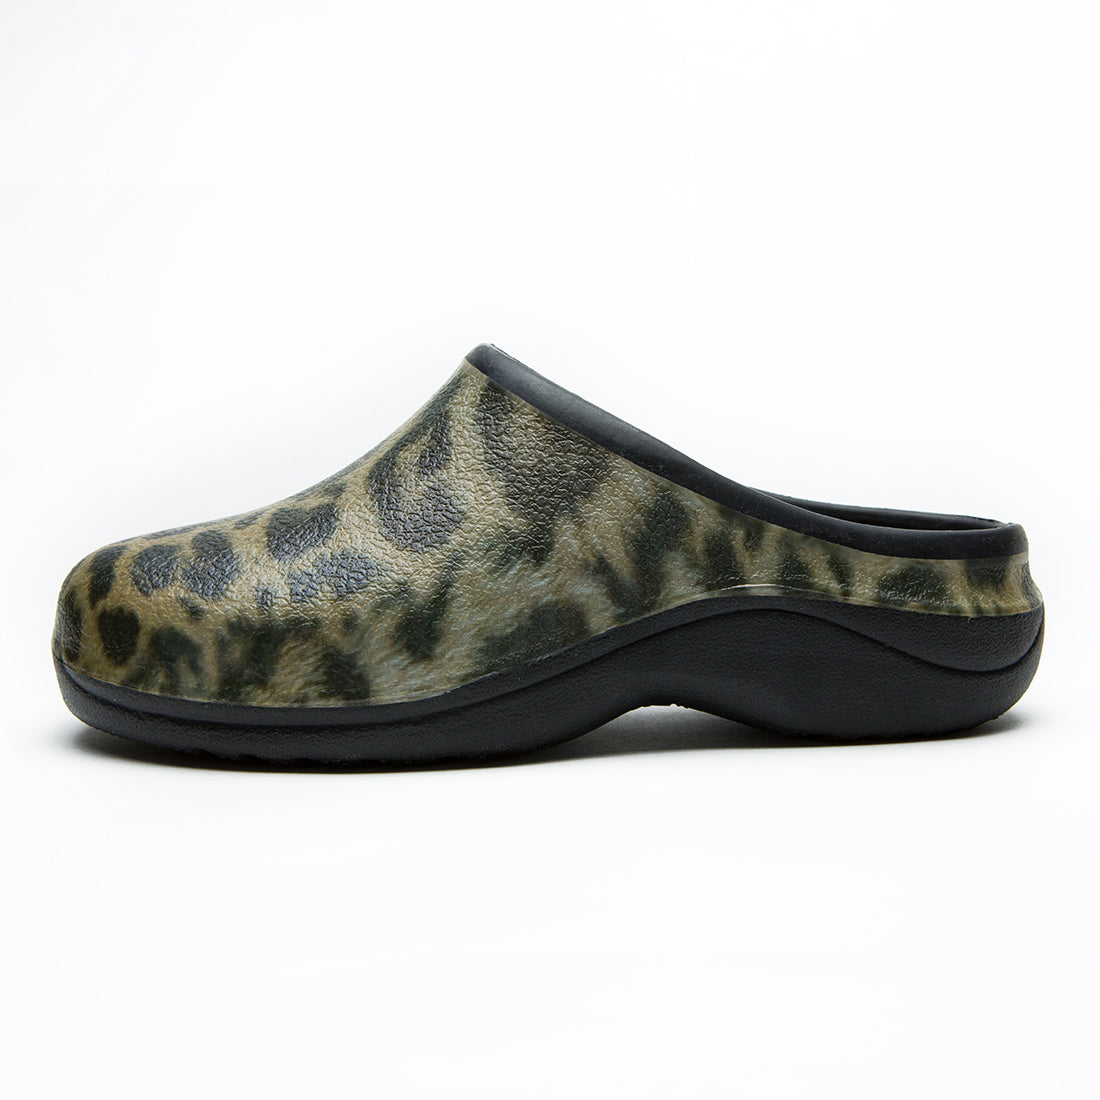 Leopard Garden Clogs Backdoorshoes® - CLEARANCE available in UK sizes 4,5 & 7 only